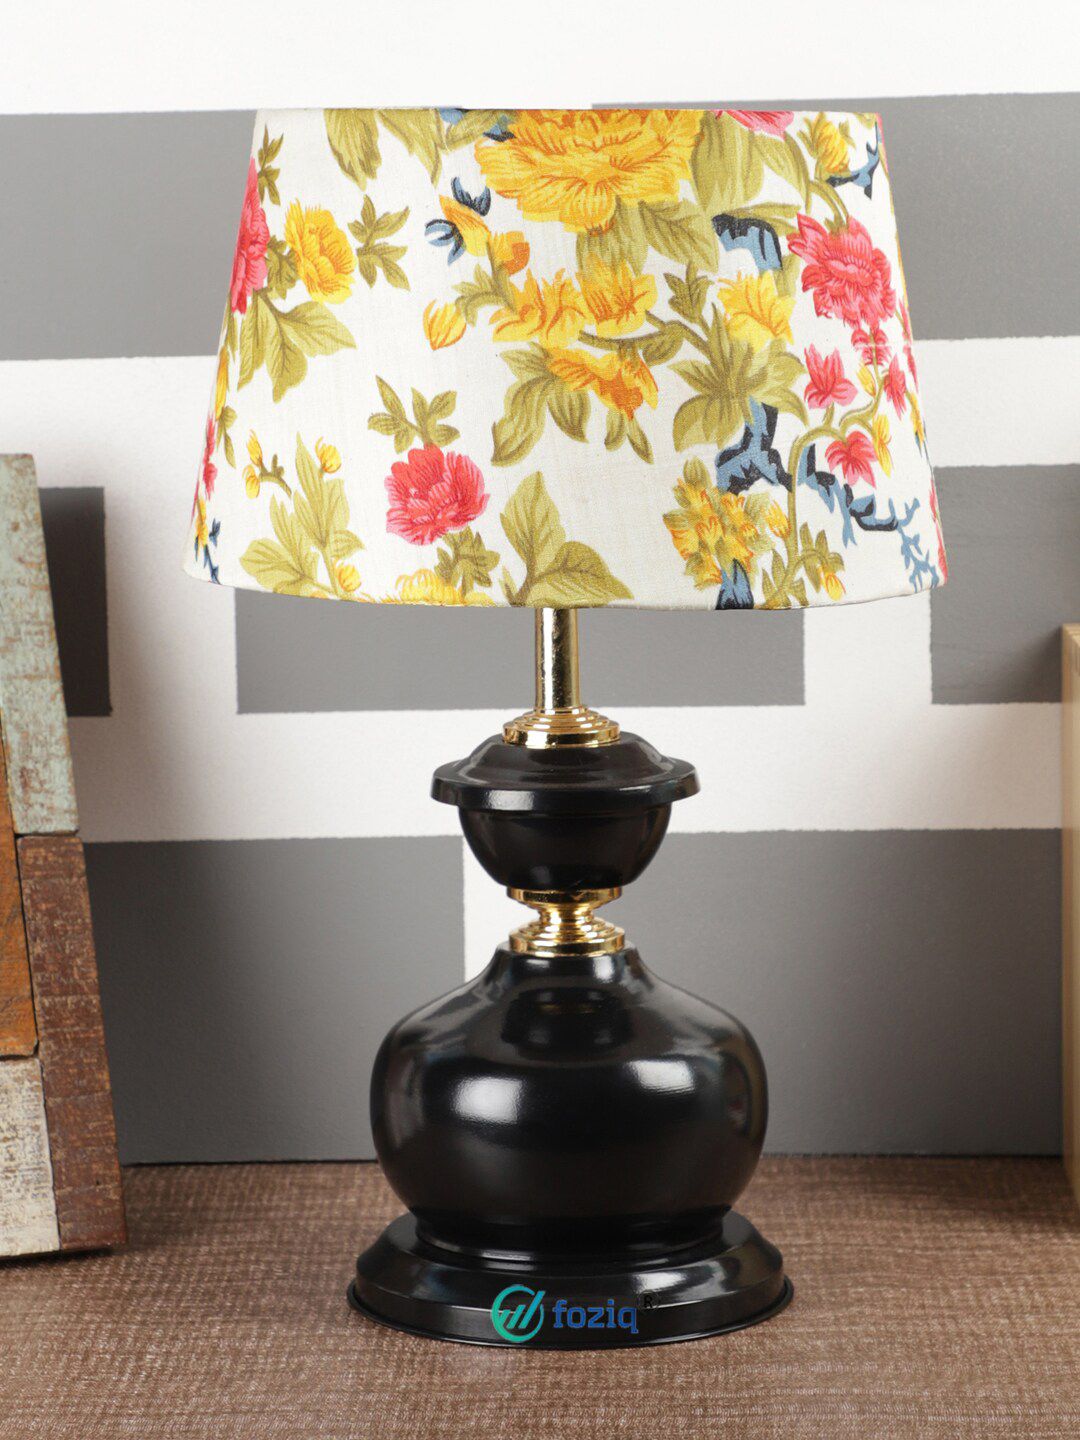 foziq Black Printed Country Table Lamp With Shade Price in India